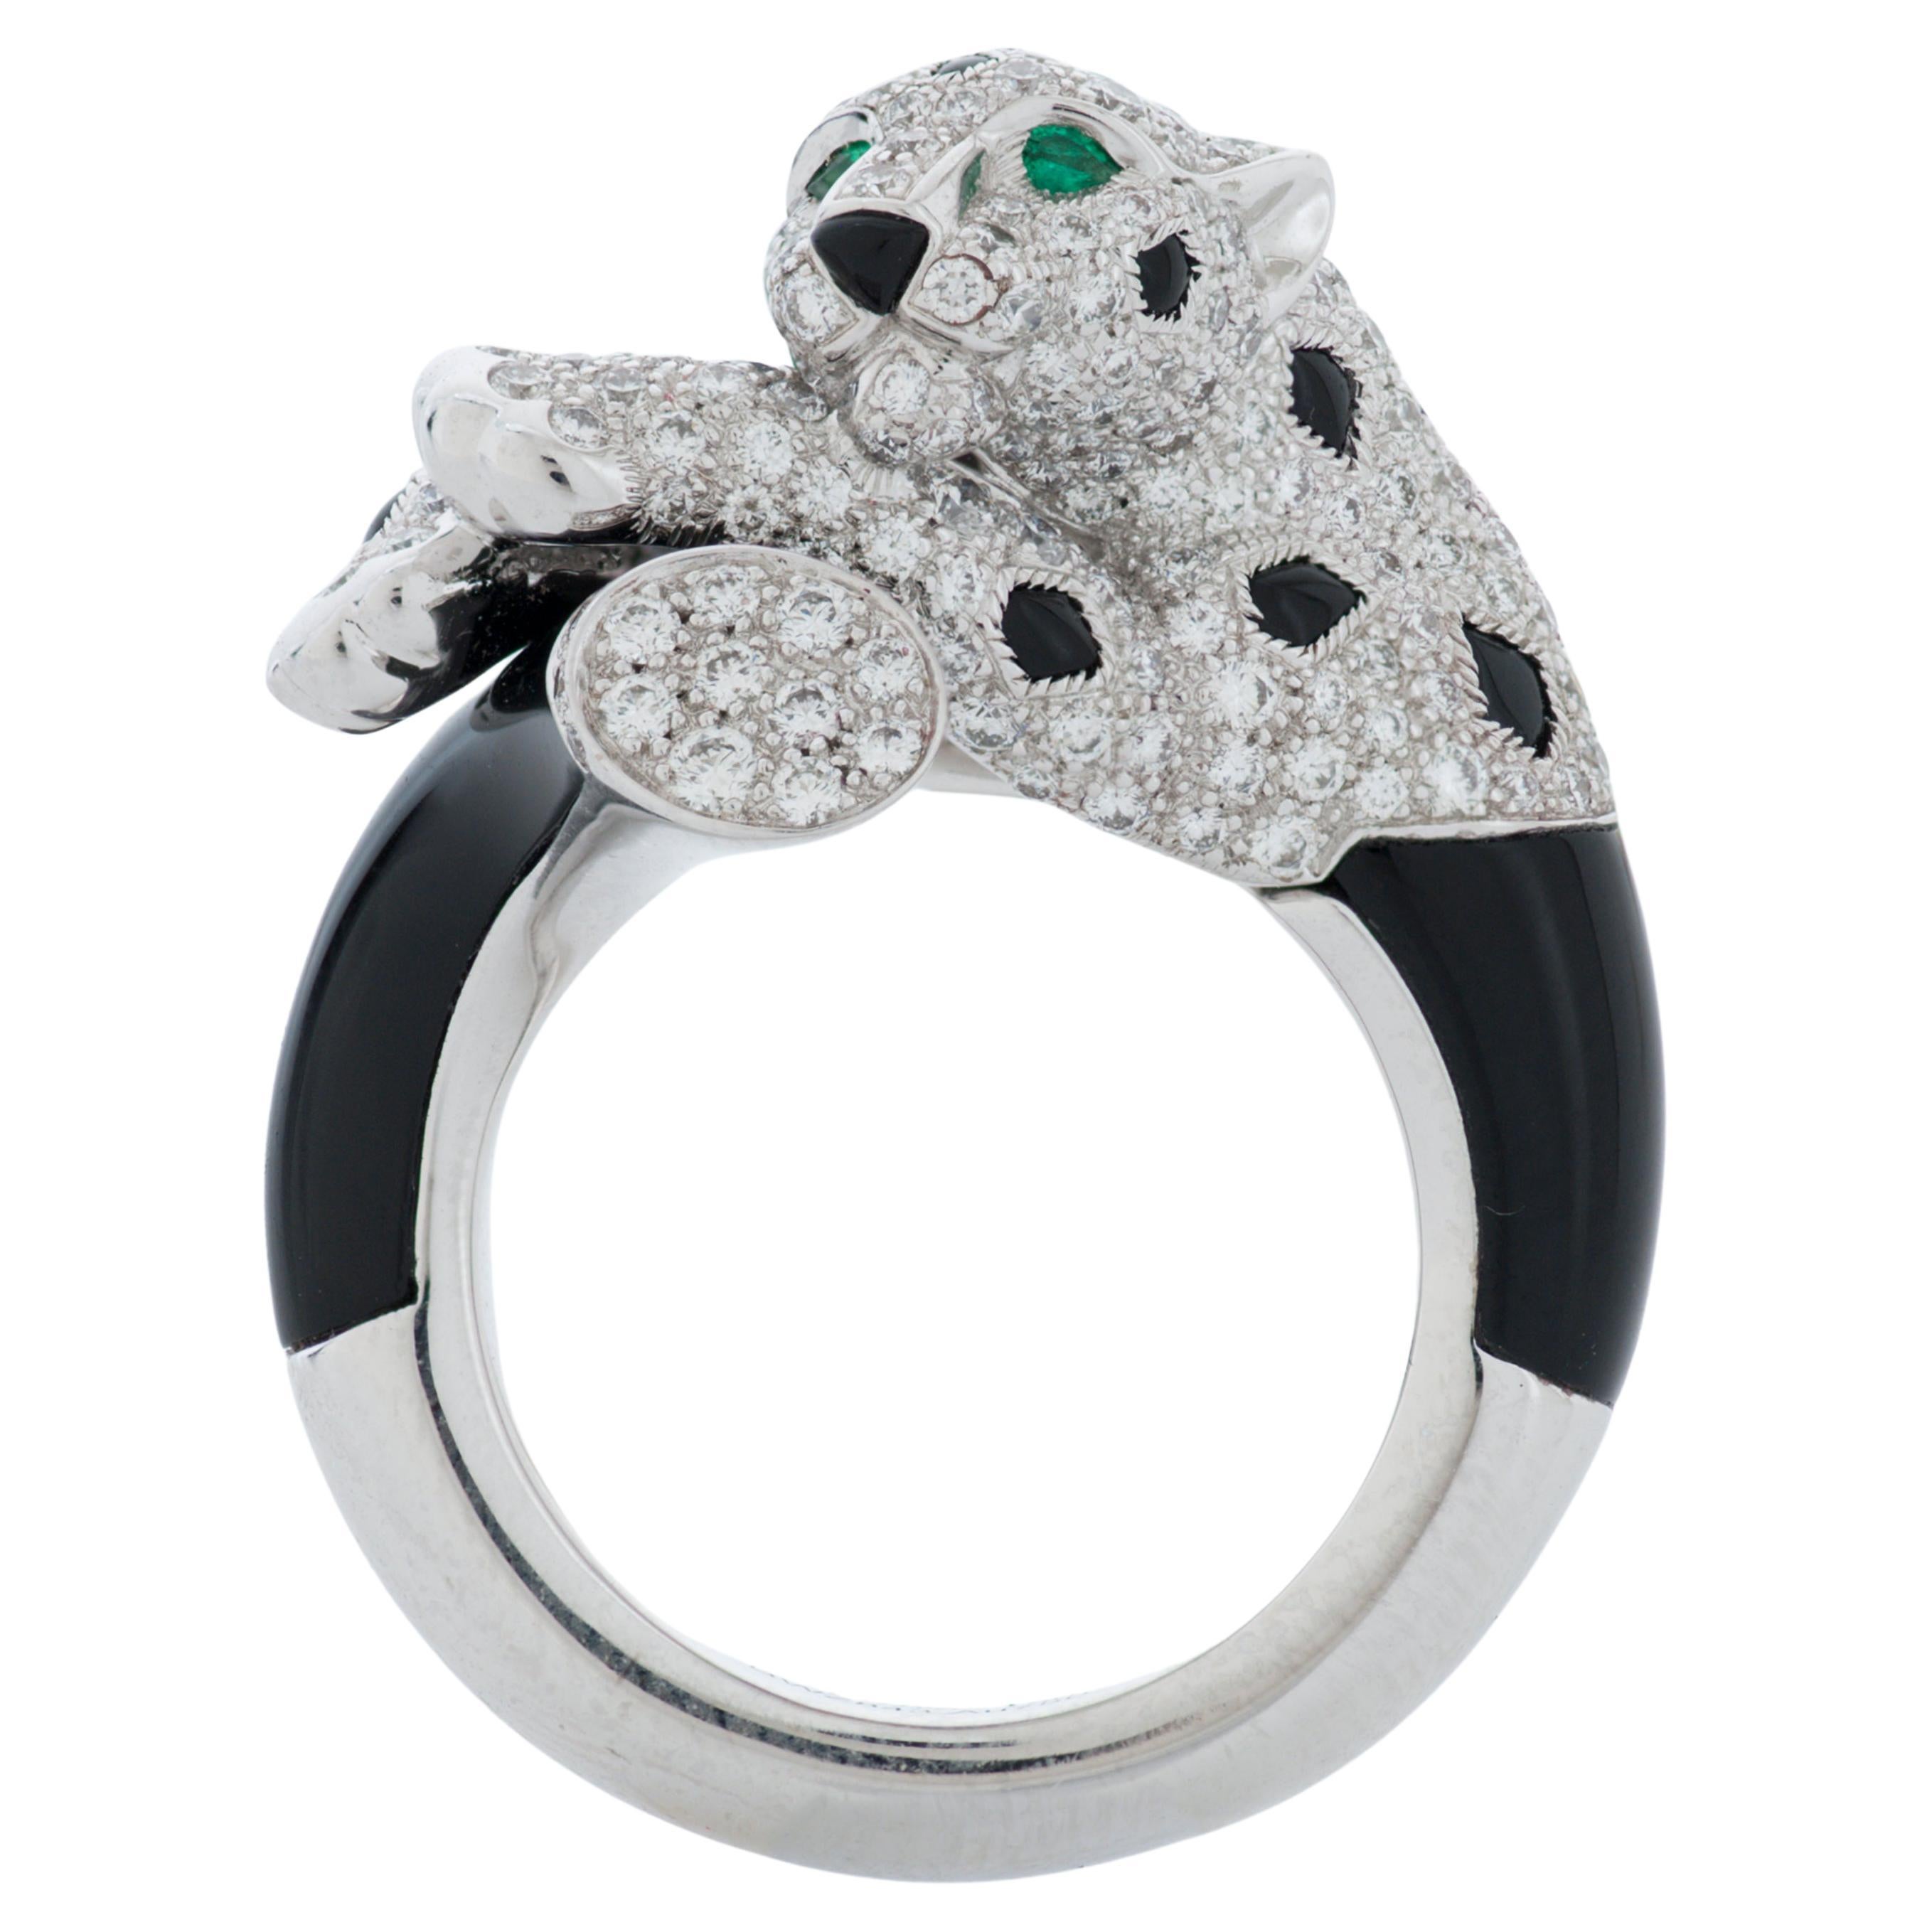 Panthere De Cartier Diamond, Onyx and Emerald Ring in 18kwg with Cartier Box